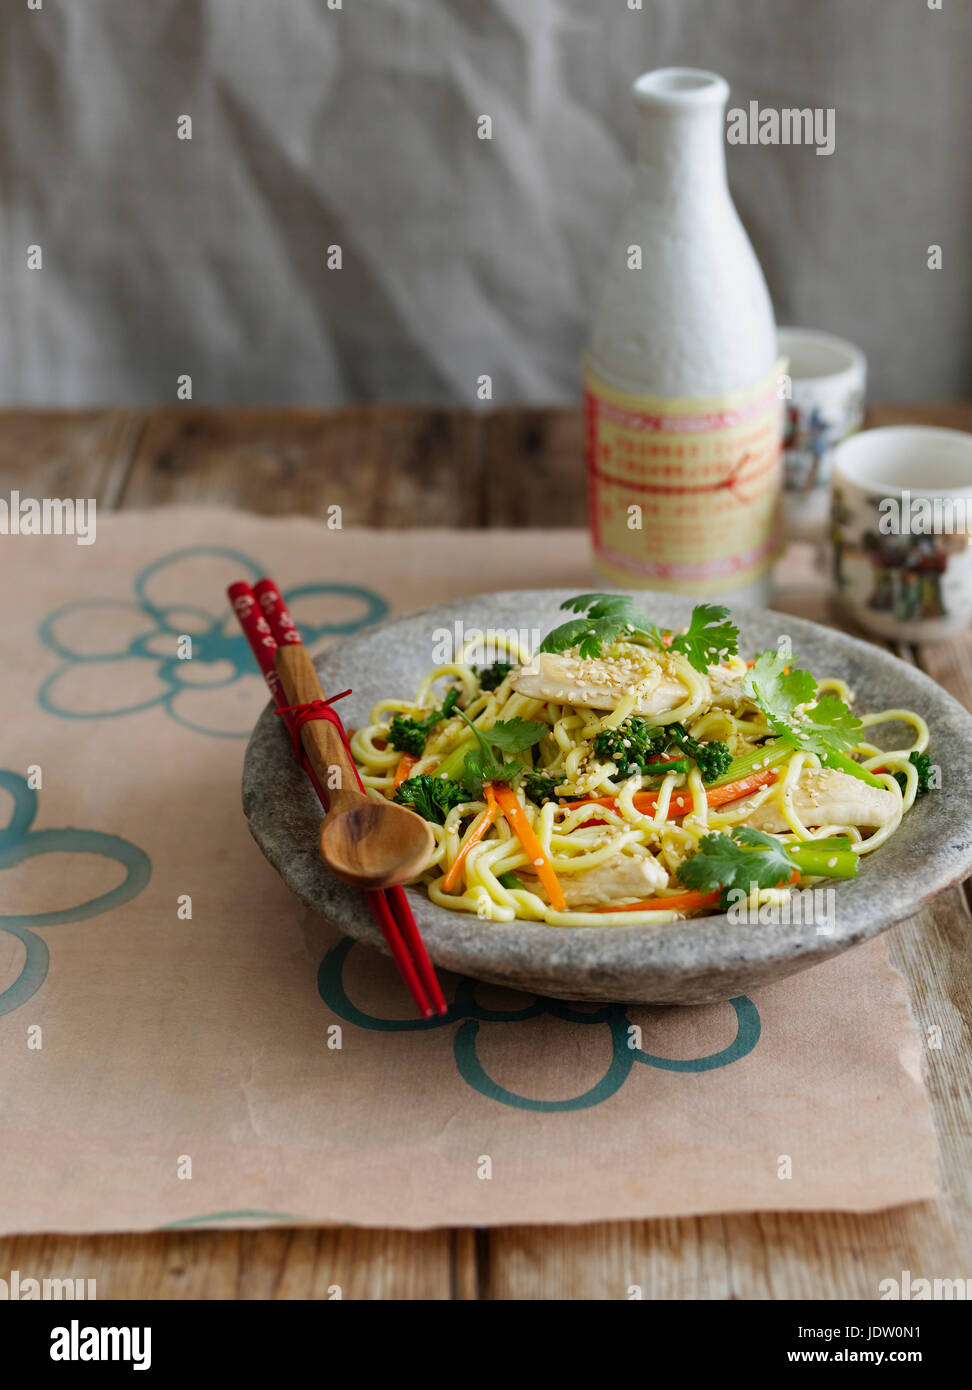 Bowl of vegetables and noodles Stock Photo